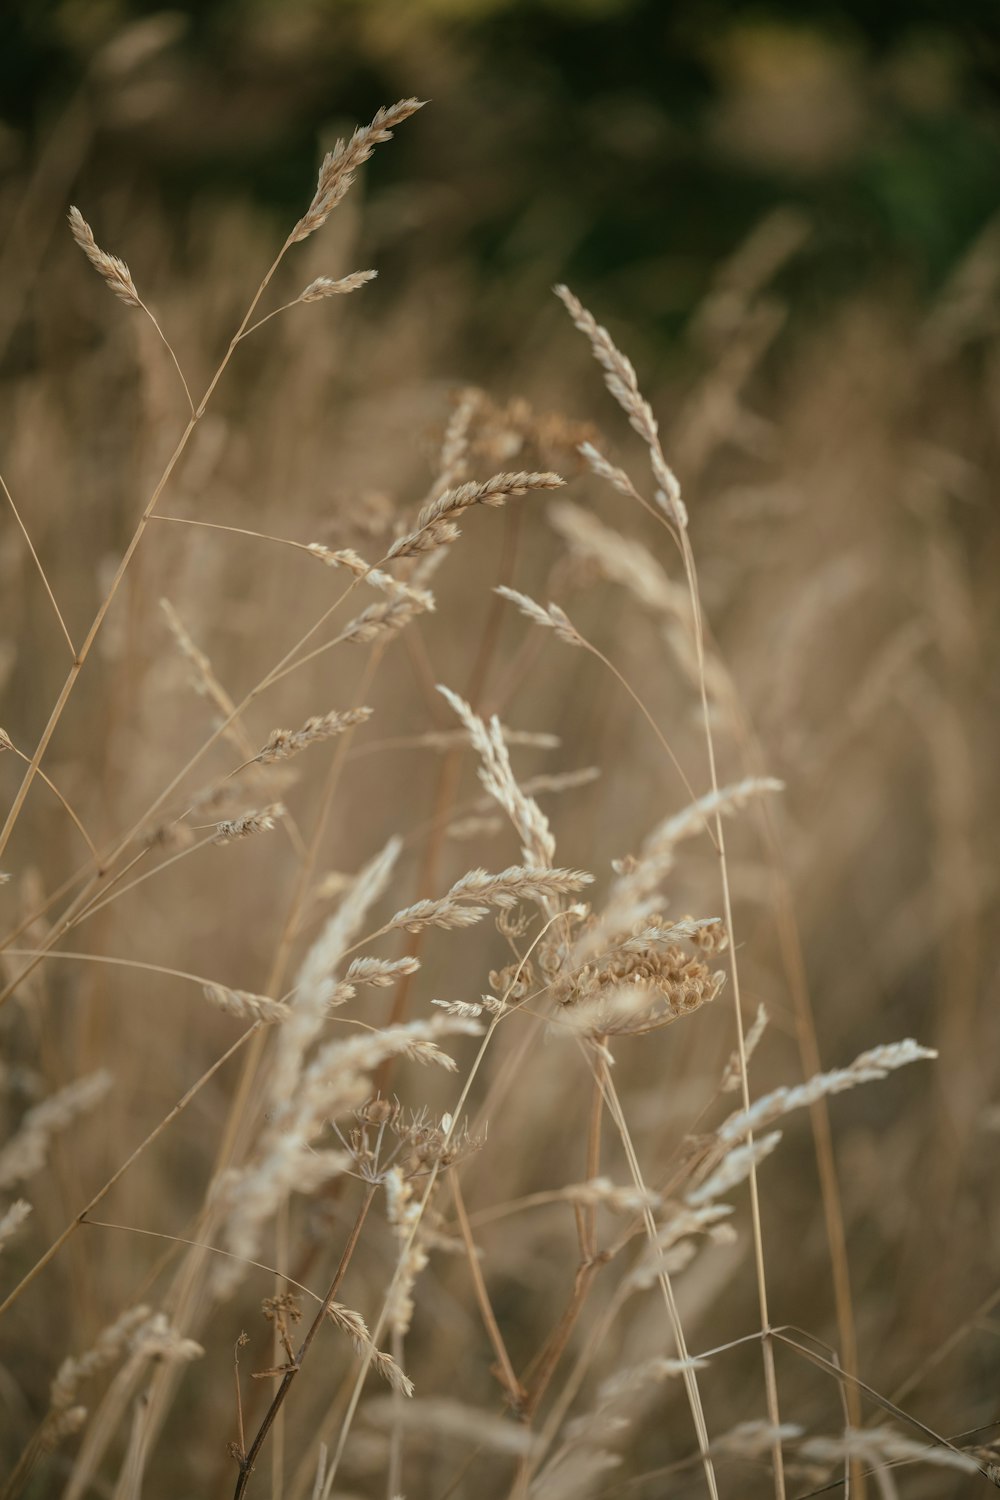 a close up of a wheat field